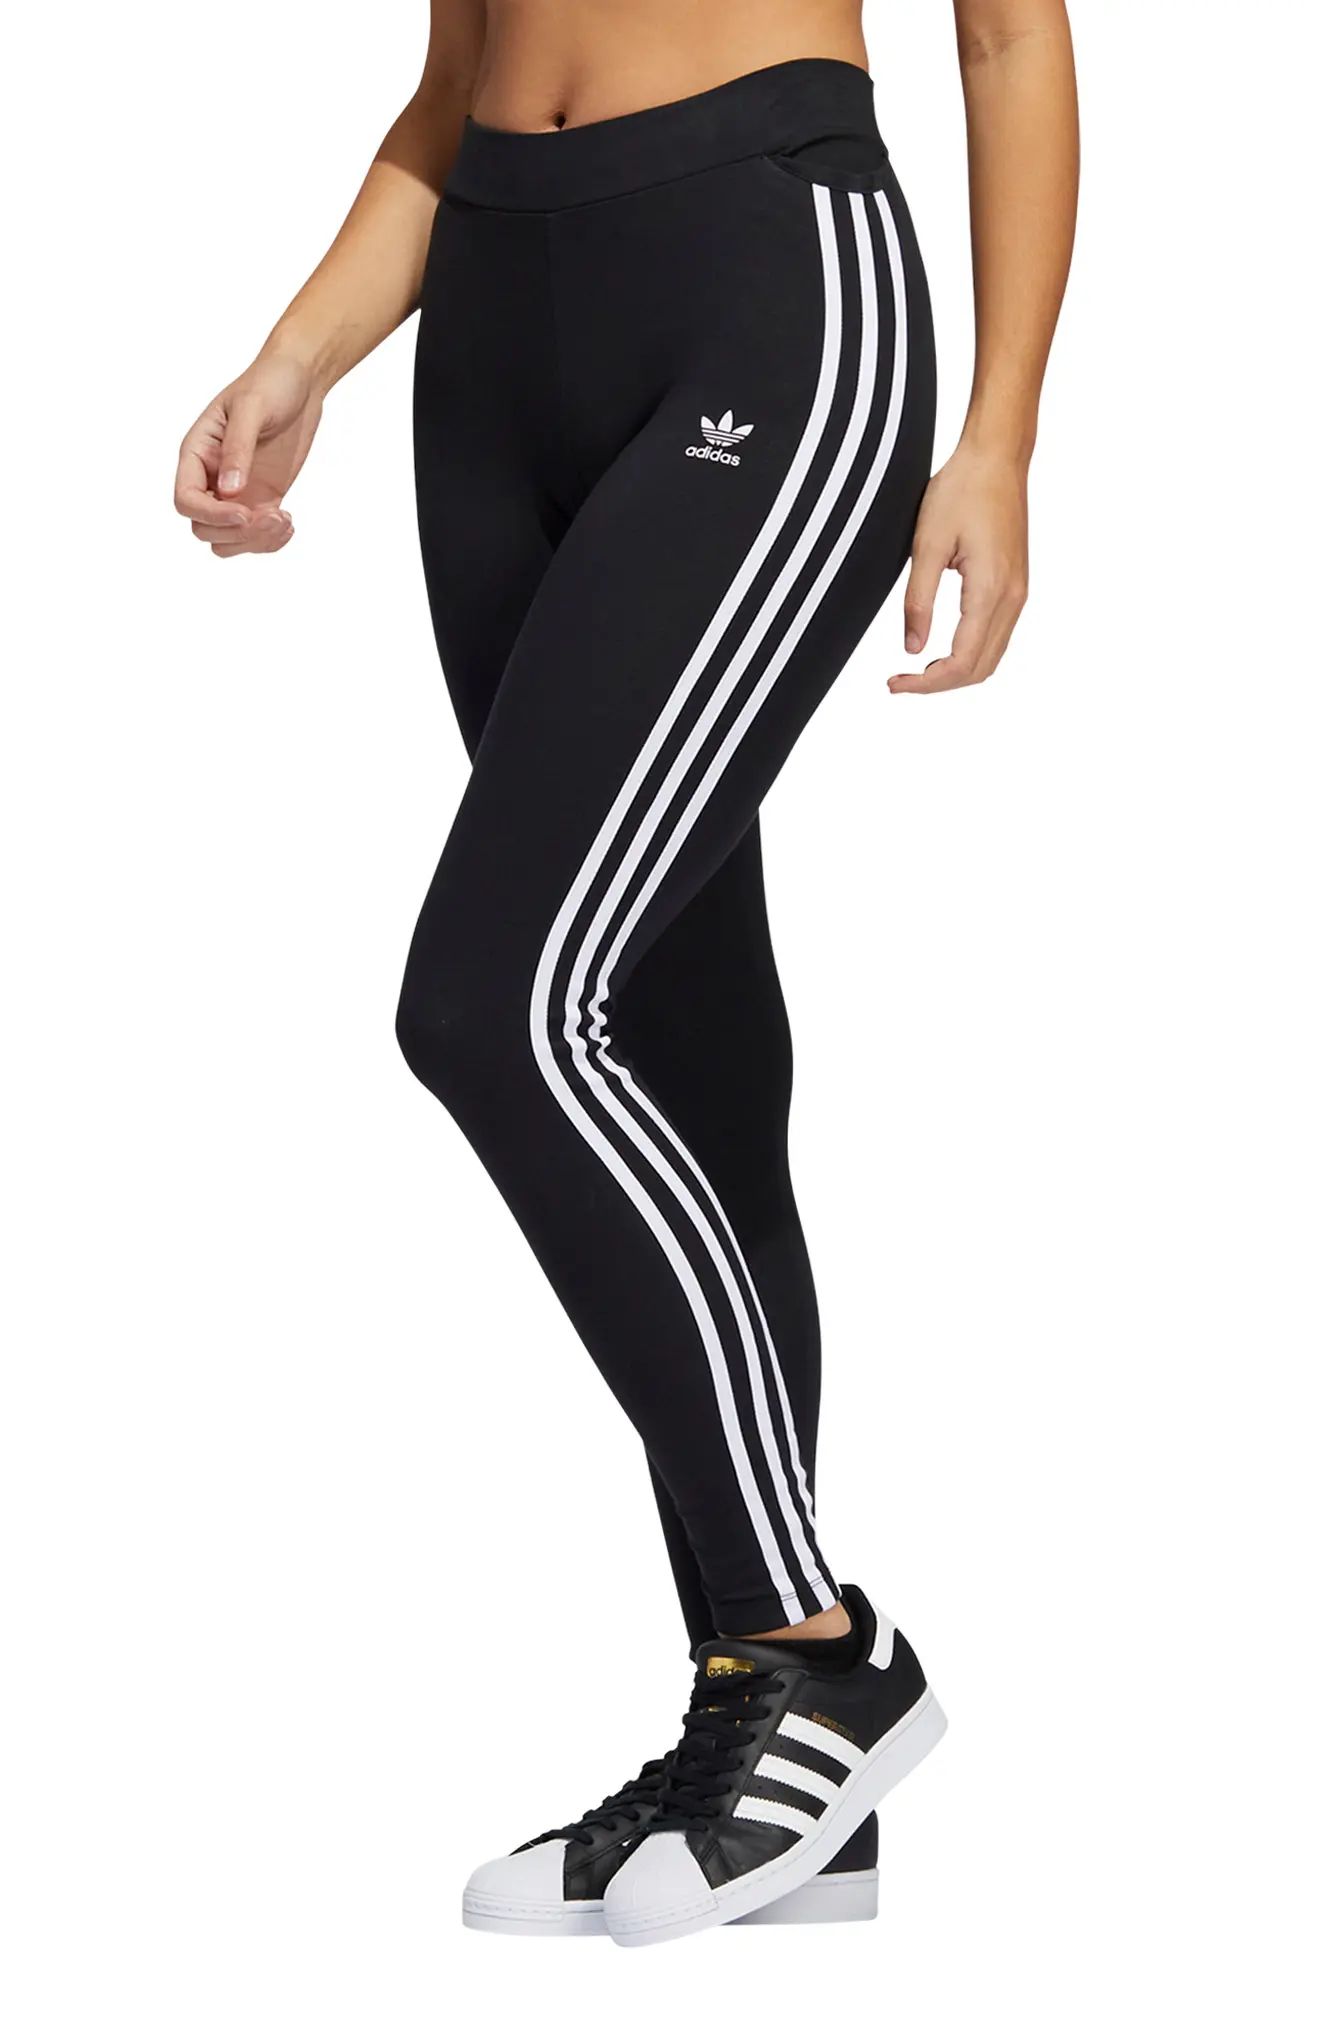 adidas Classic 3-Stripes Tights, Size Xx-Small in Black at Nordstrom | Nordstrom